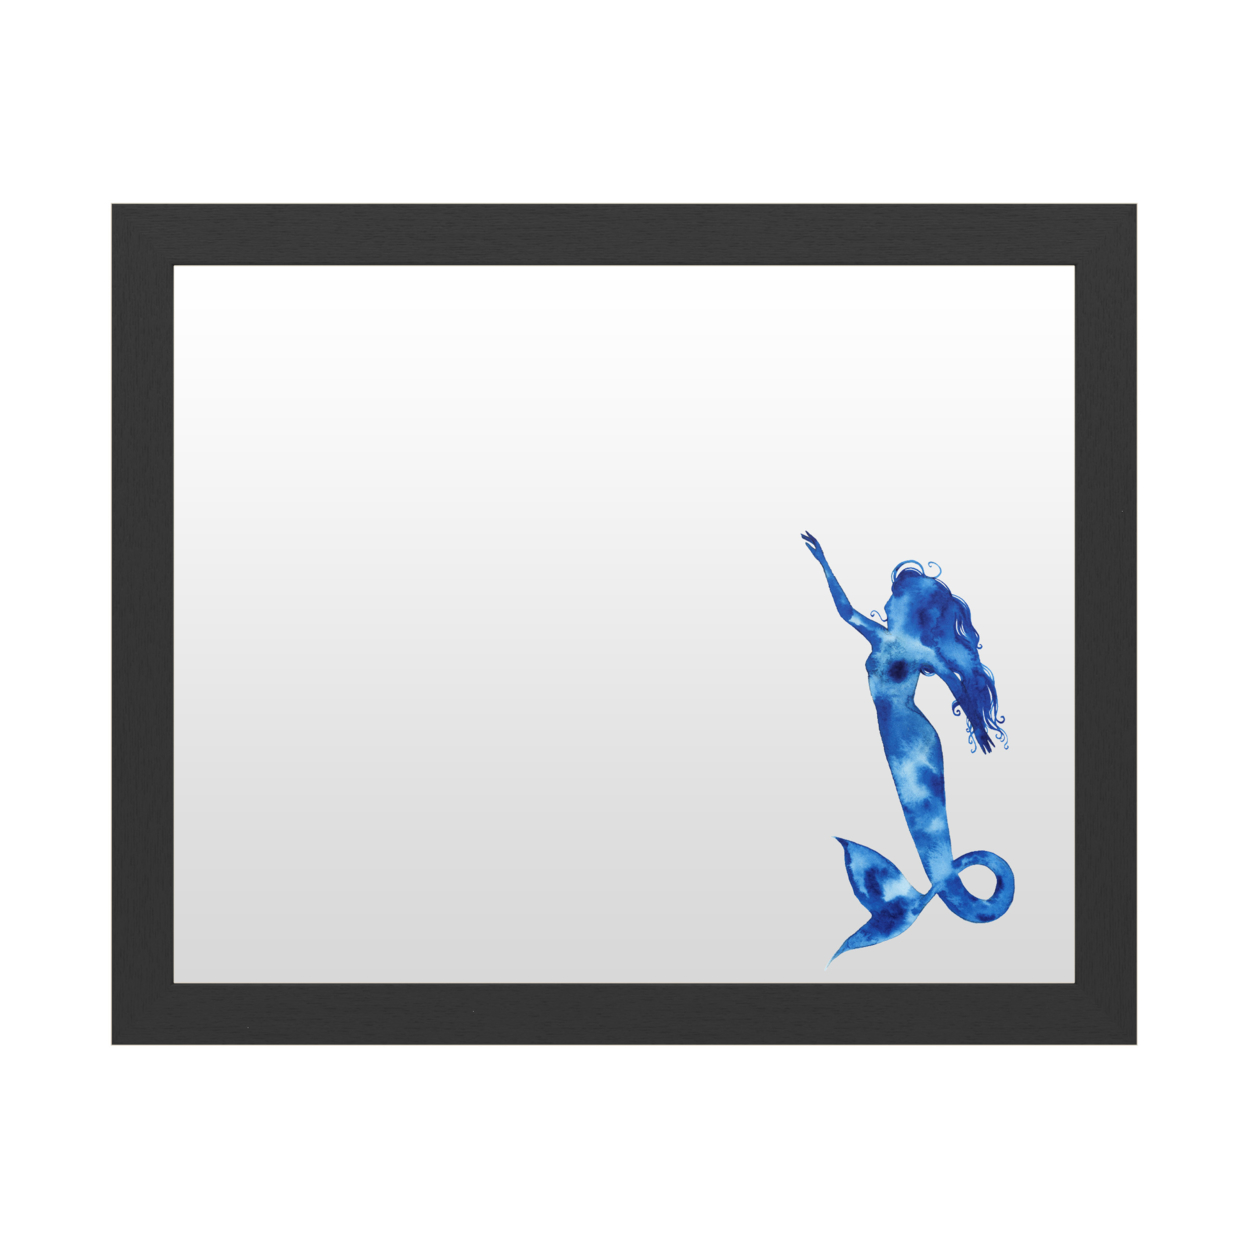 Dry Erase 16 X 20 Marker Board With Printed Artwork - Grace Popp Blue Sirena I White Board - Ready To Hang